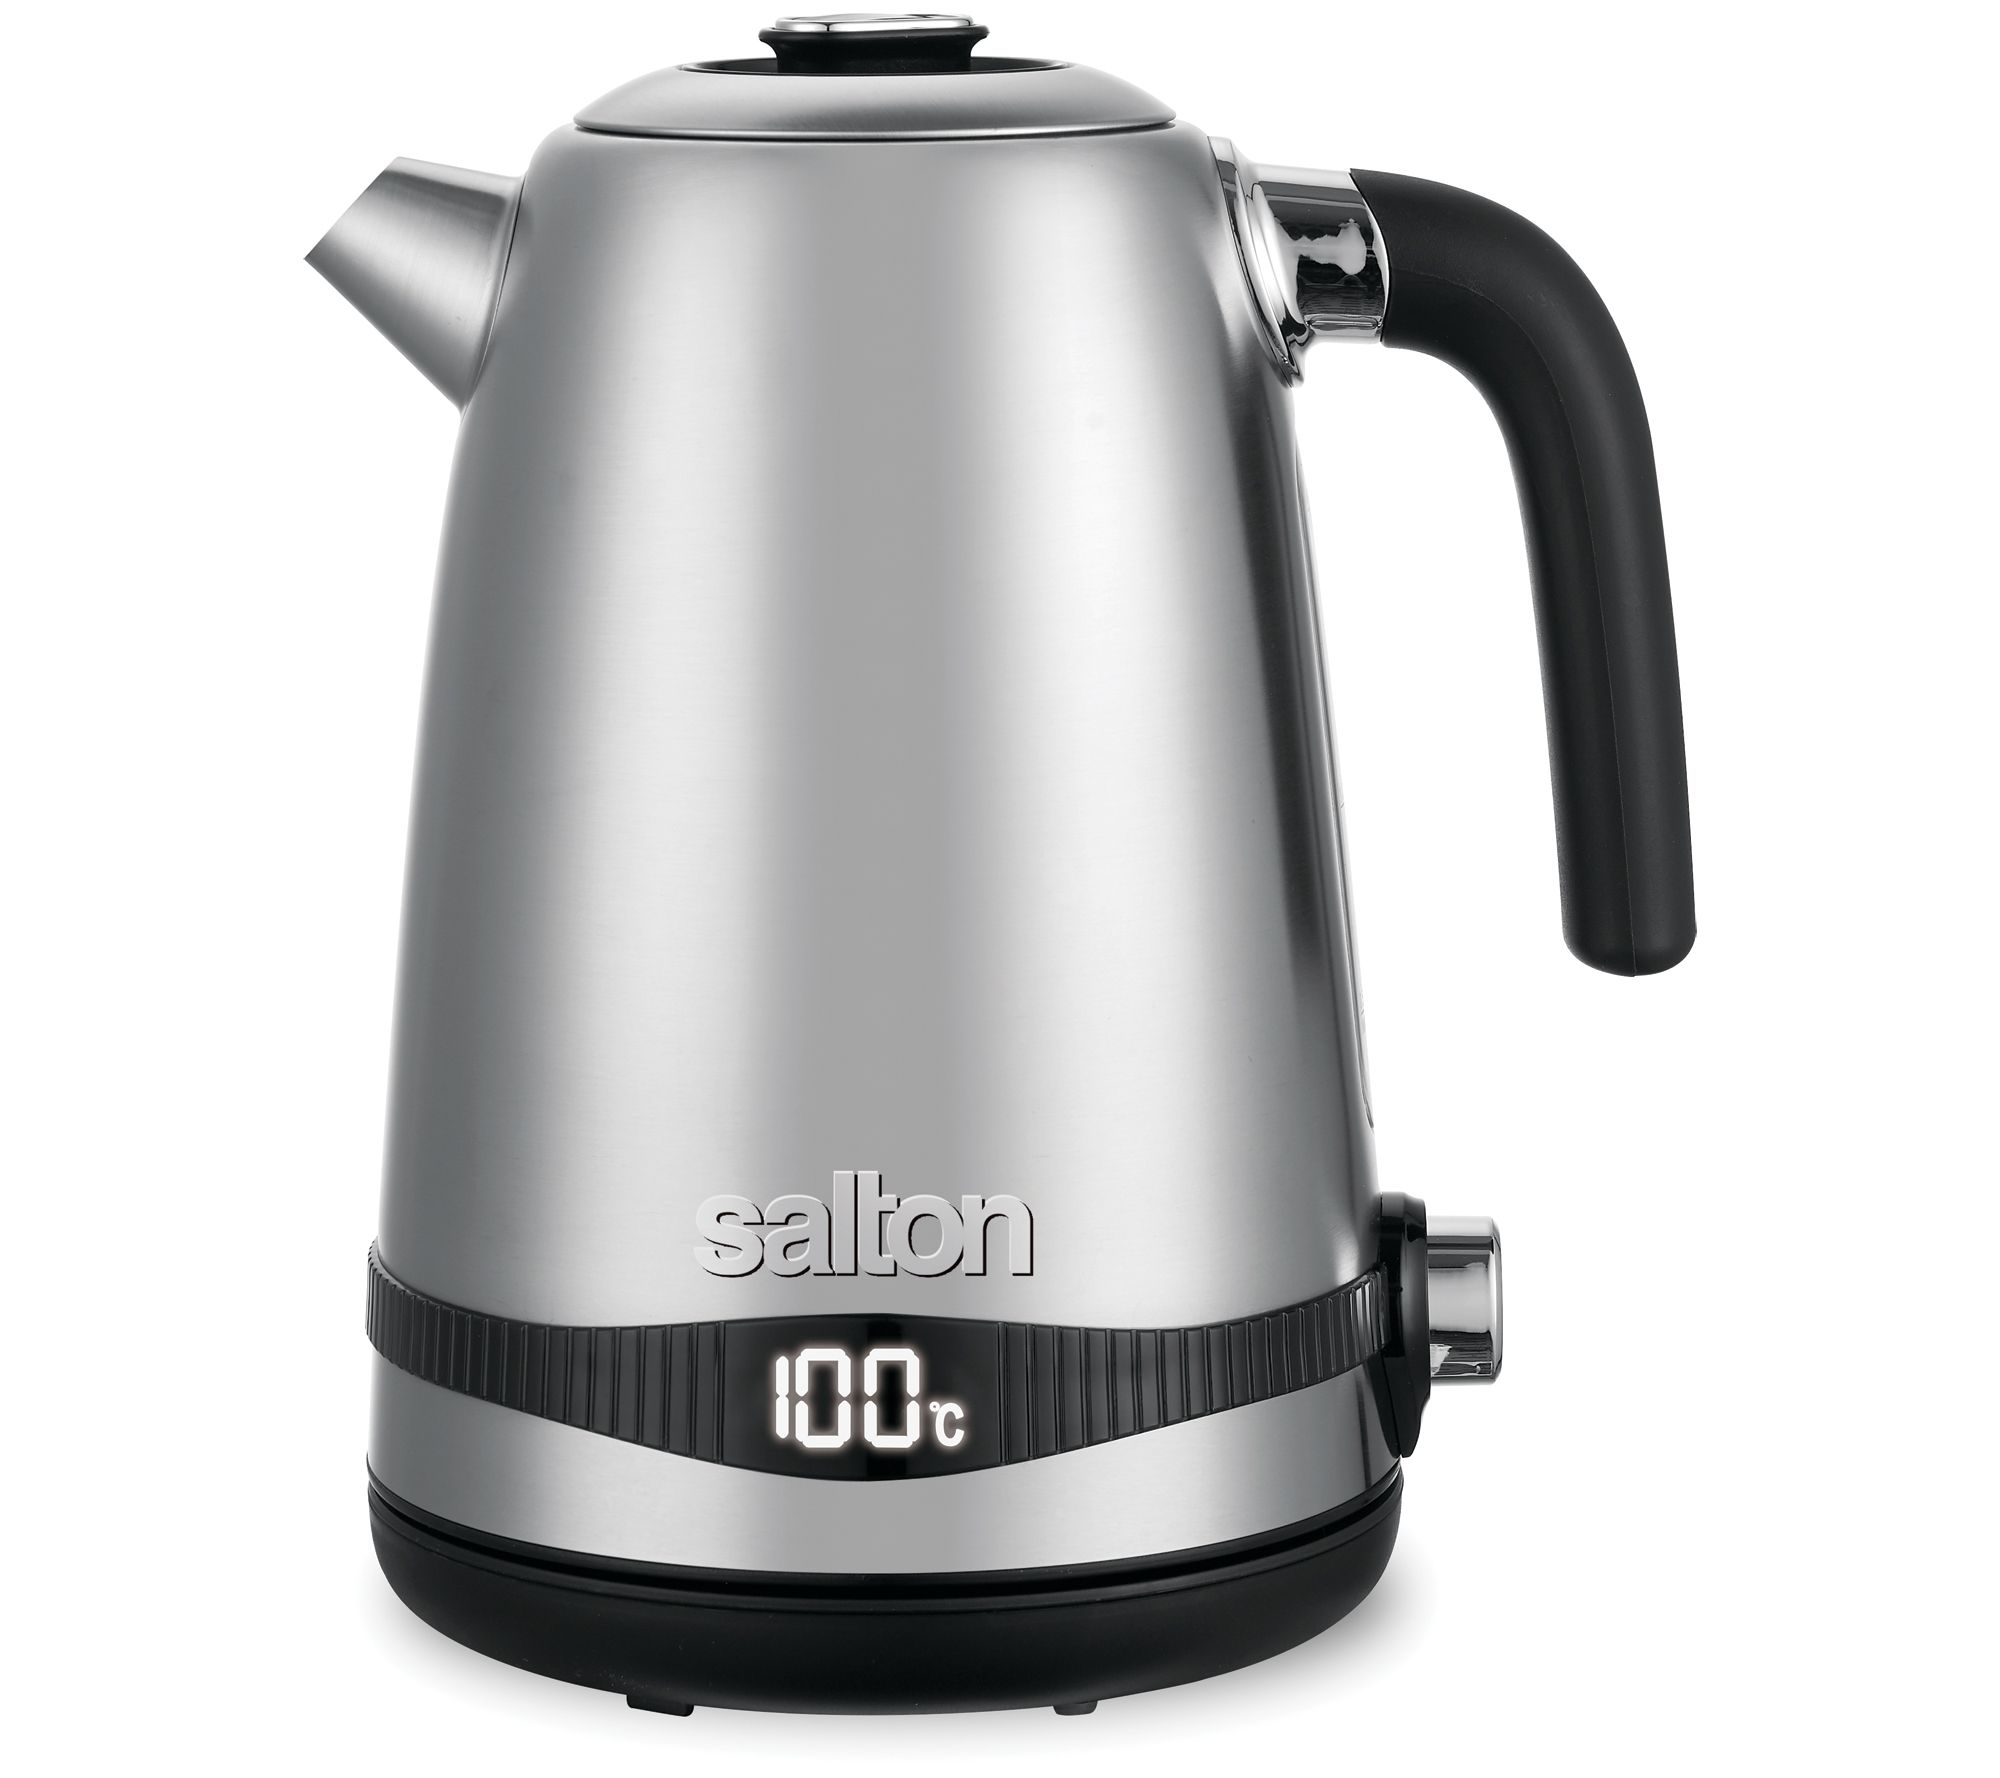 Dash 1.7-Liter Insulated Electric Kettle Black